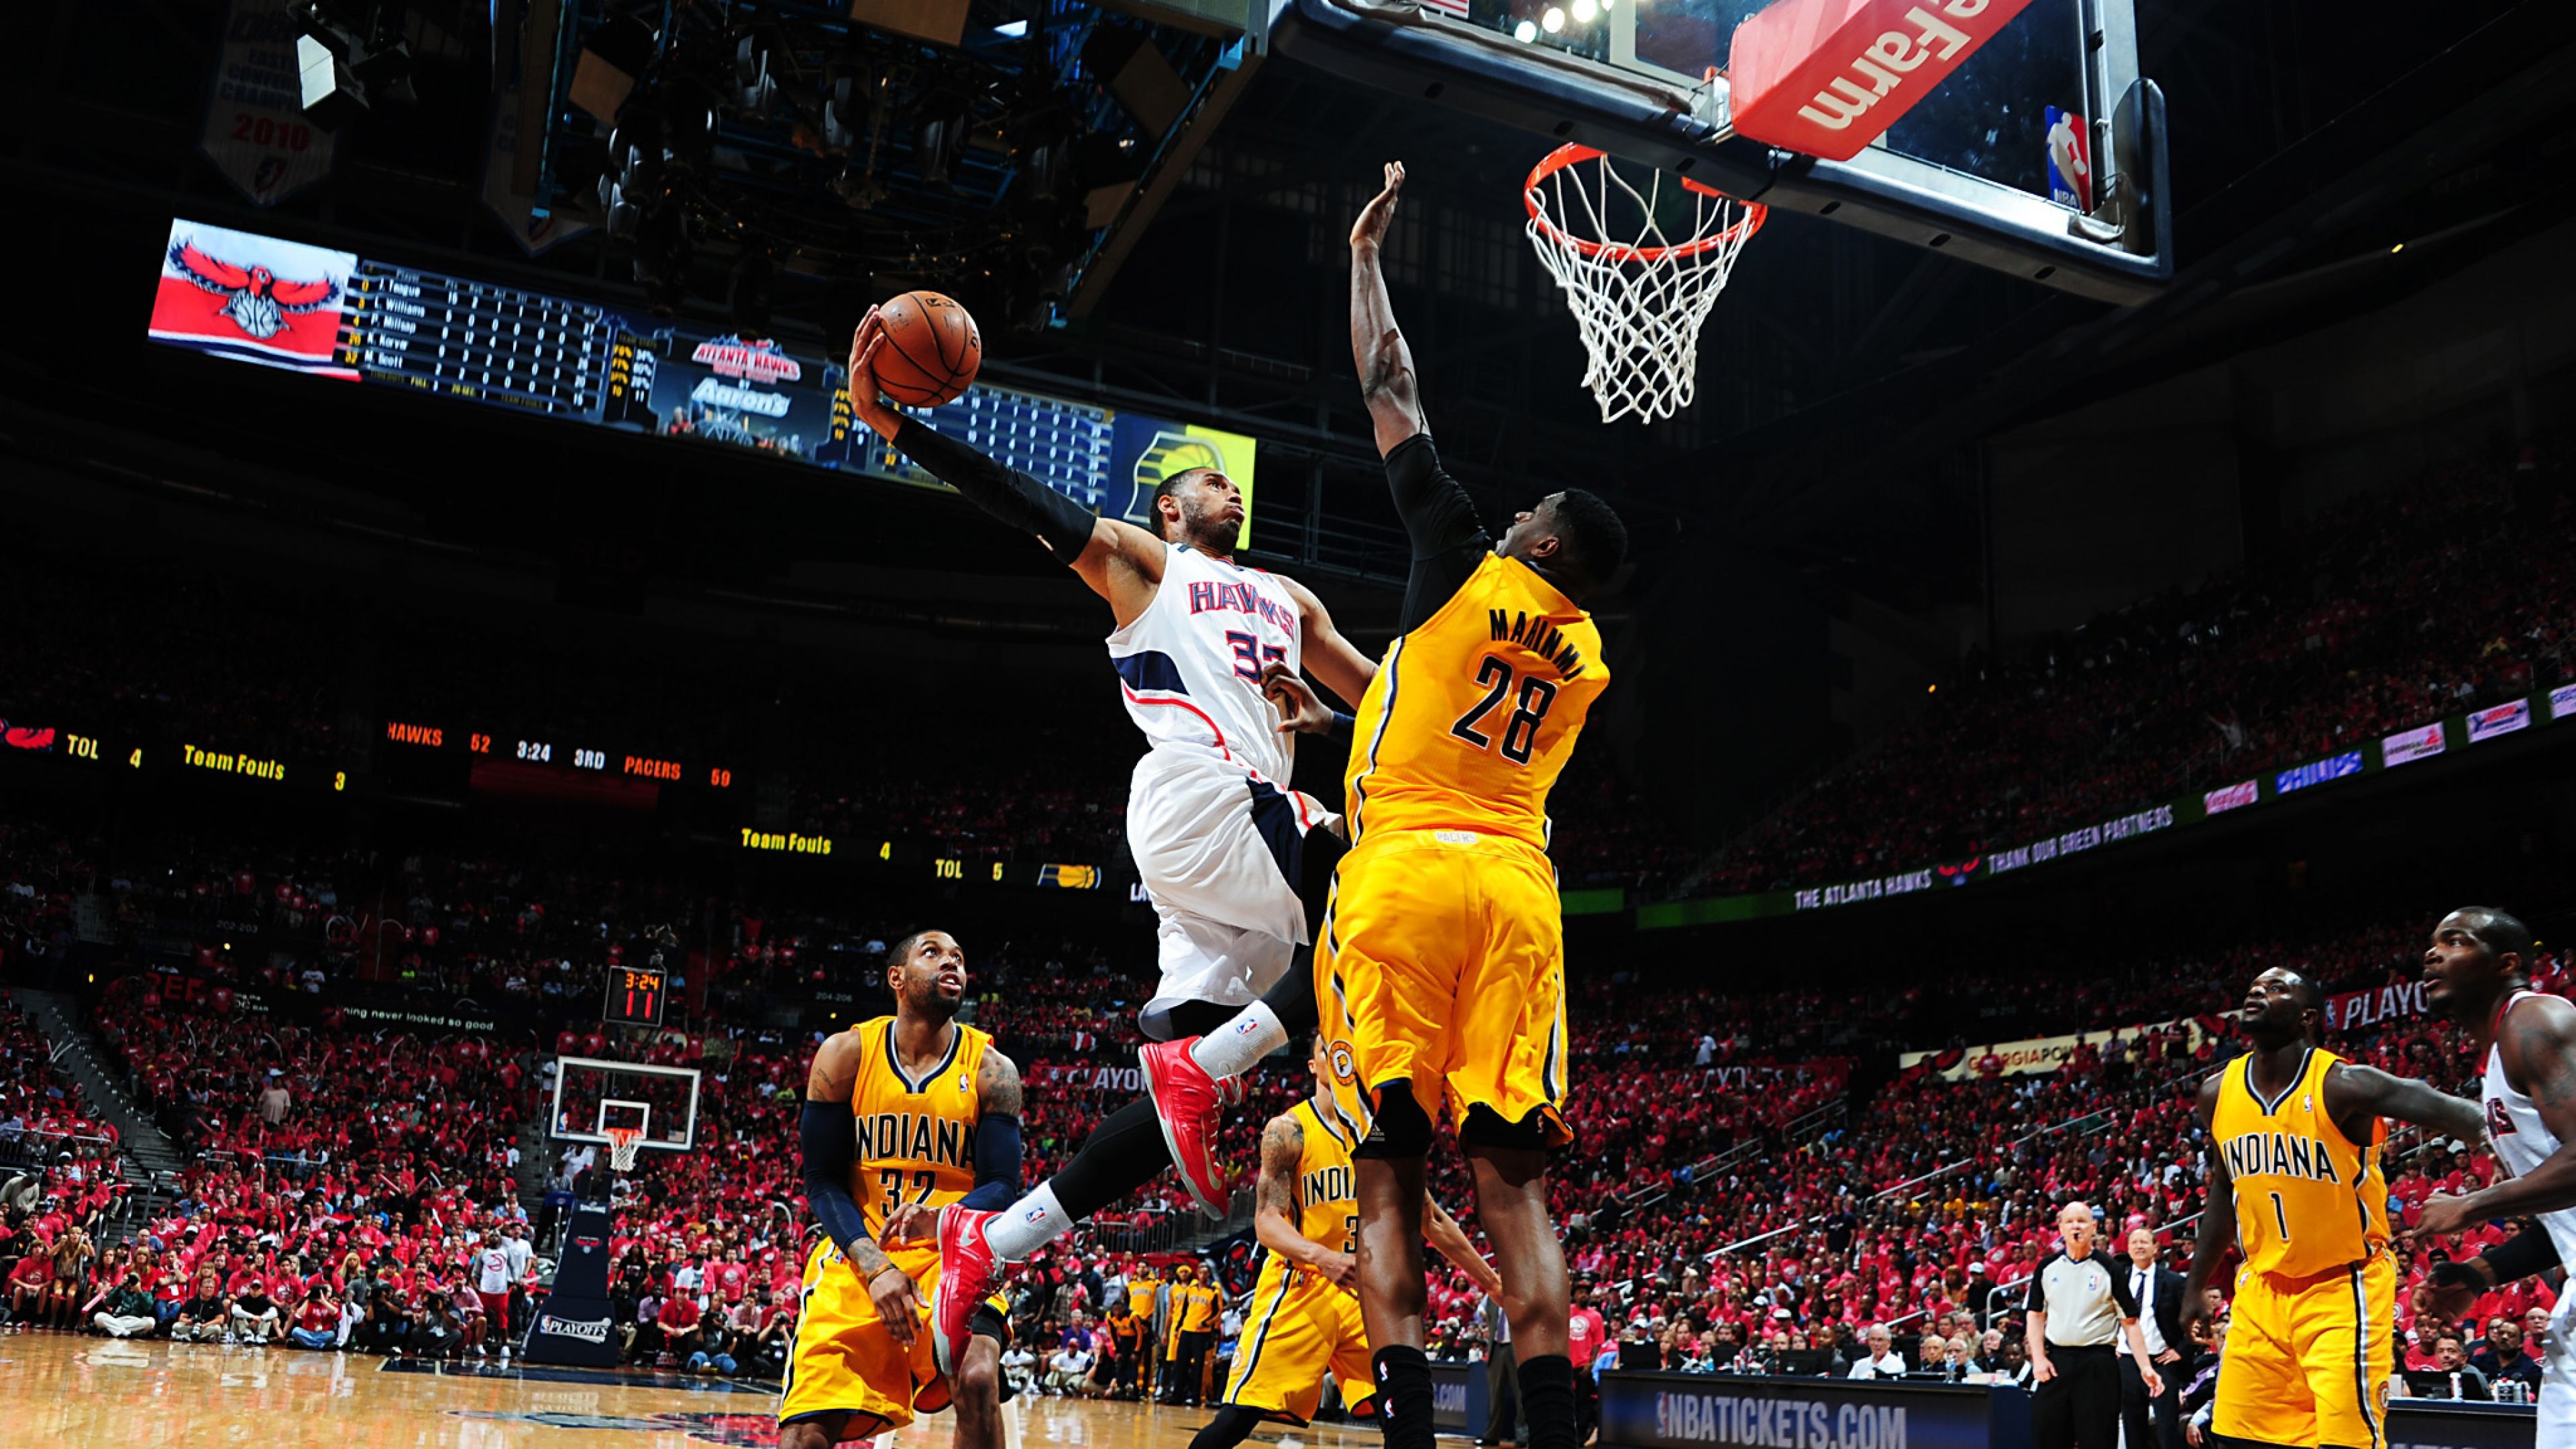 The Atlanta Hawks and Indiana Pacers are in the midst of a tight Eastern Conference battle. - NBA